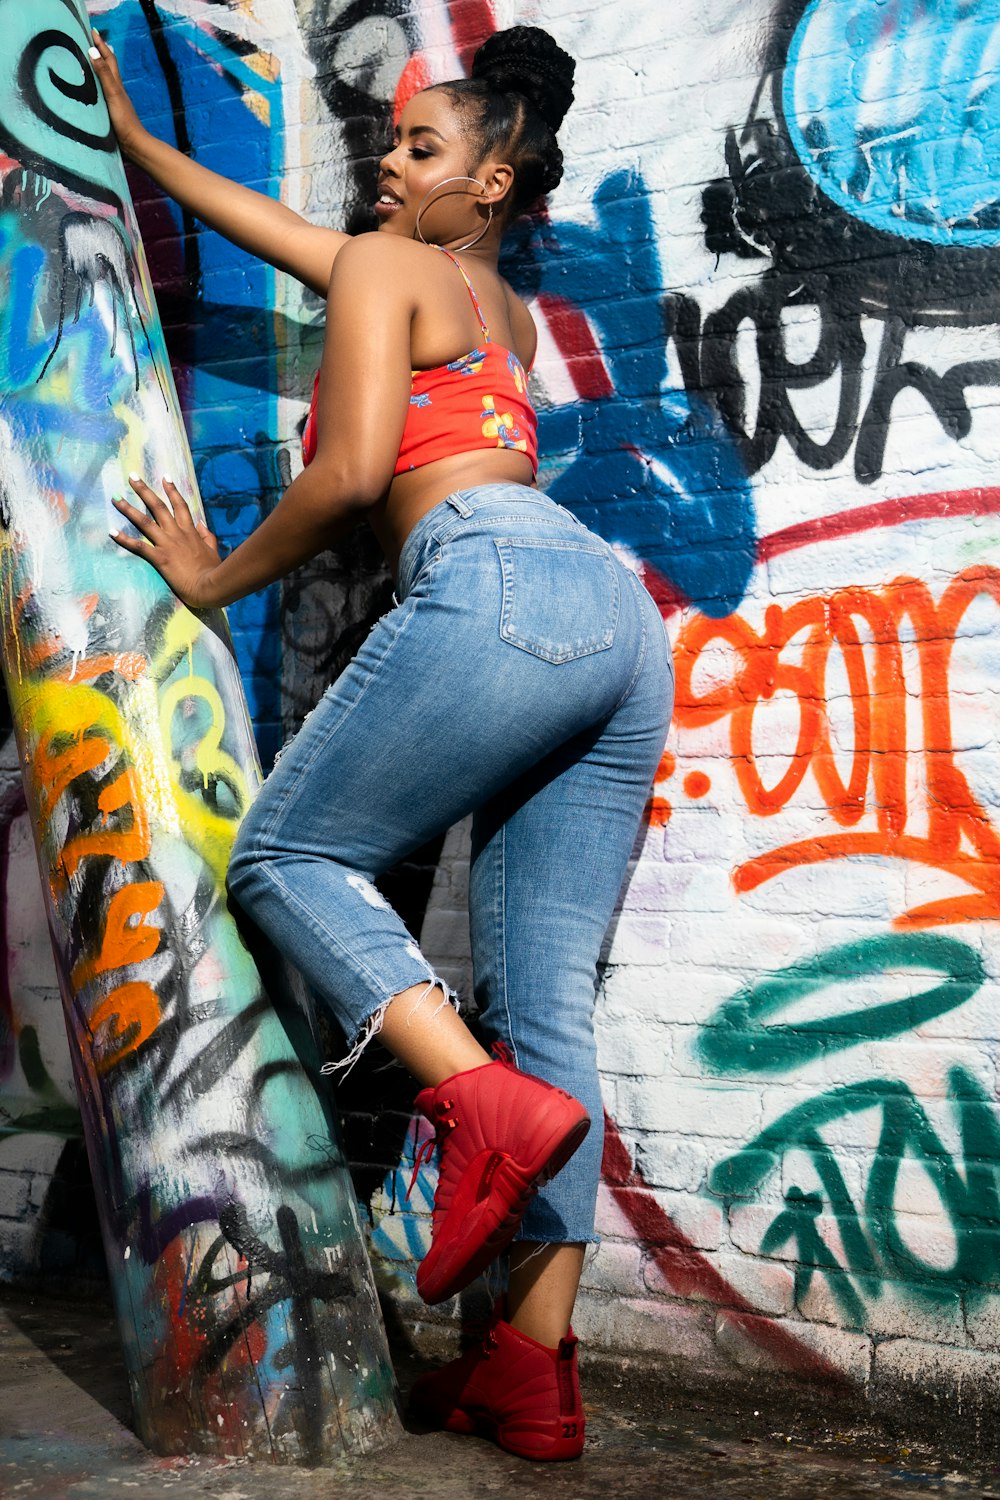 woman in blue denim jeans and red sports bra leaning on wall with graffiti